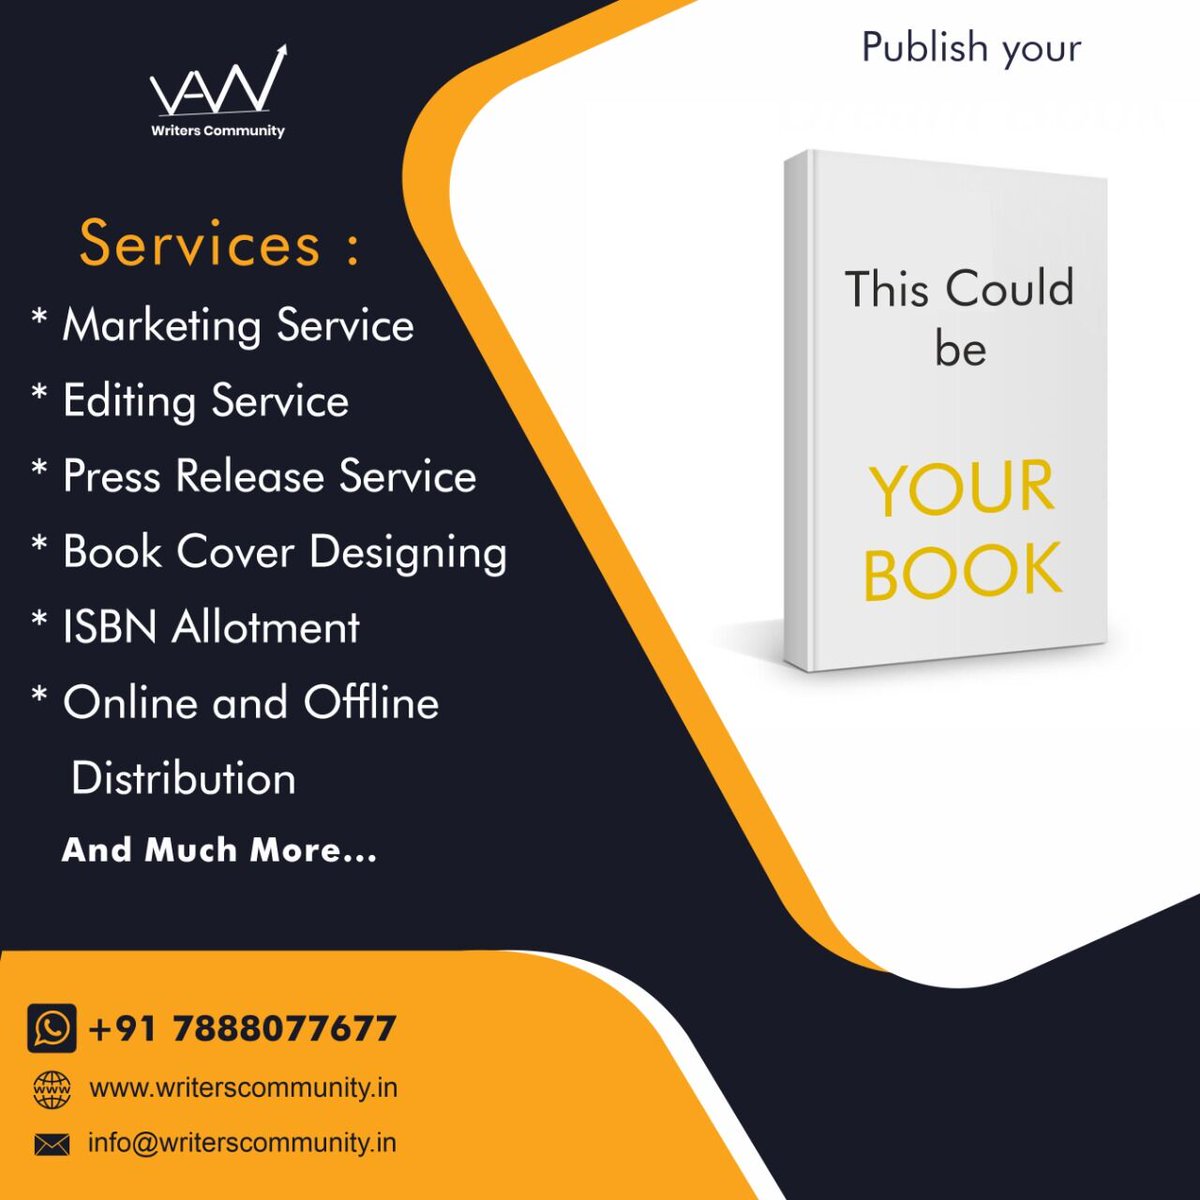 'Publish your Dream Book with this Services' ⠀ ＊ Marketing Service ＊ Editing Service ＊ Press Release Service ＊ Book Cover Designing ＊ ISBN Allotment ＊Online and Offline Distribution' ⠀ #bookpublishing #books #authors #selfpublishing #publishing